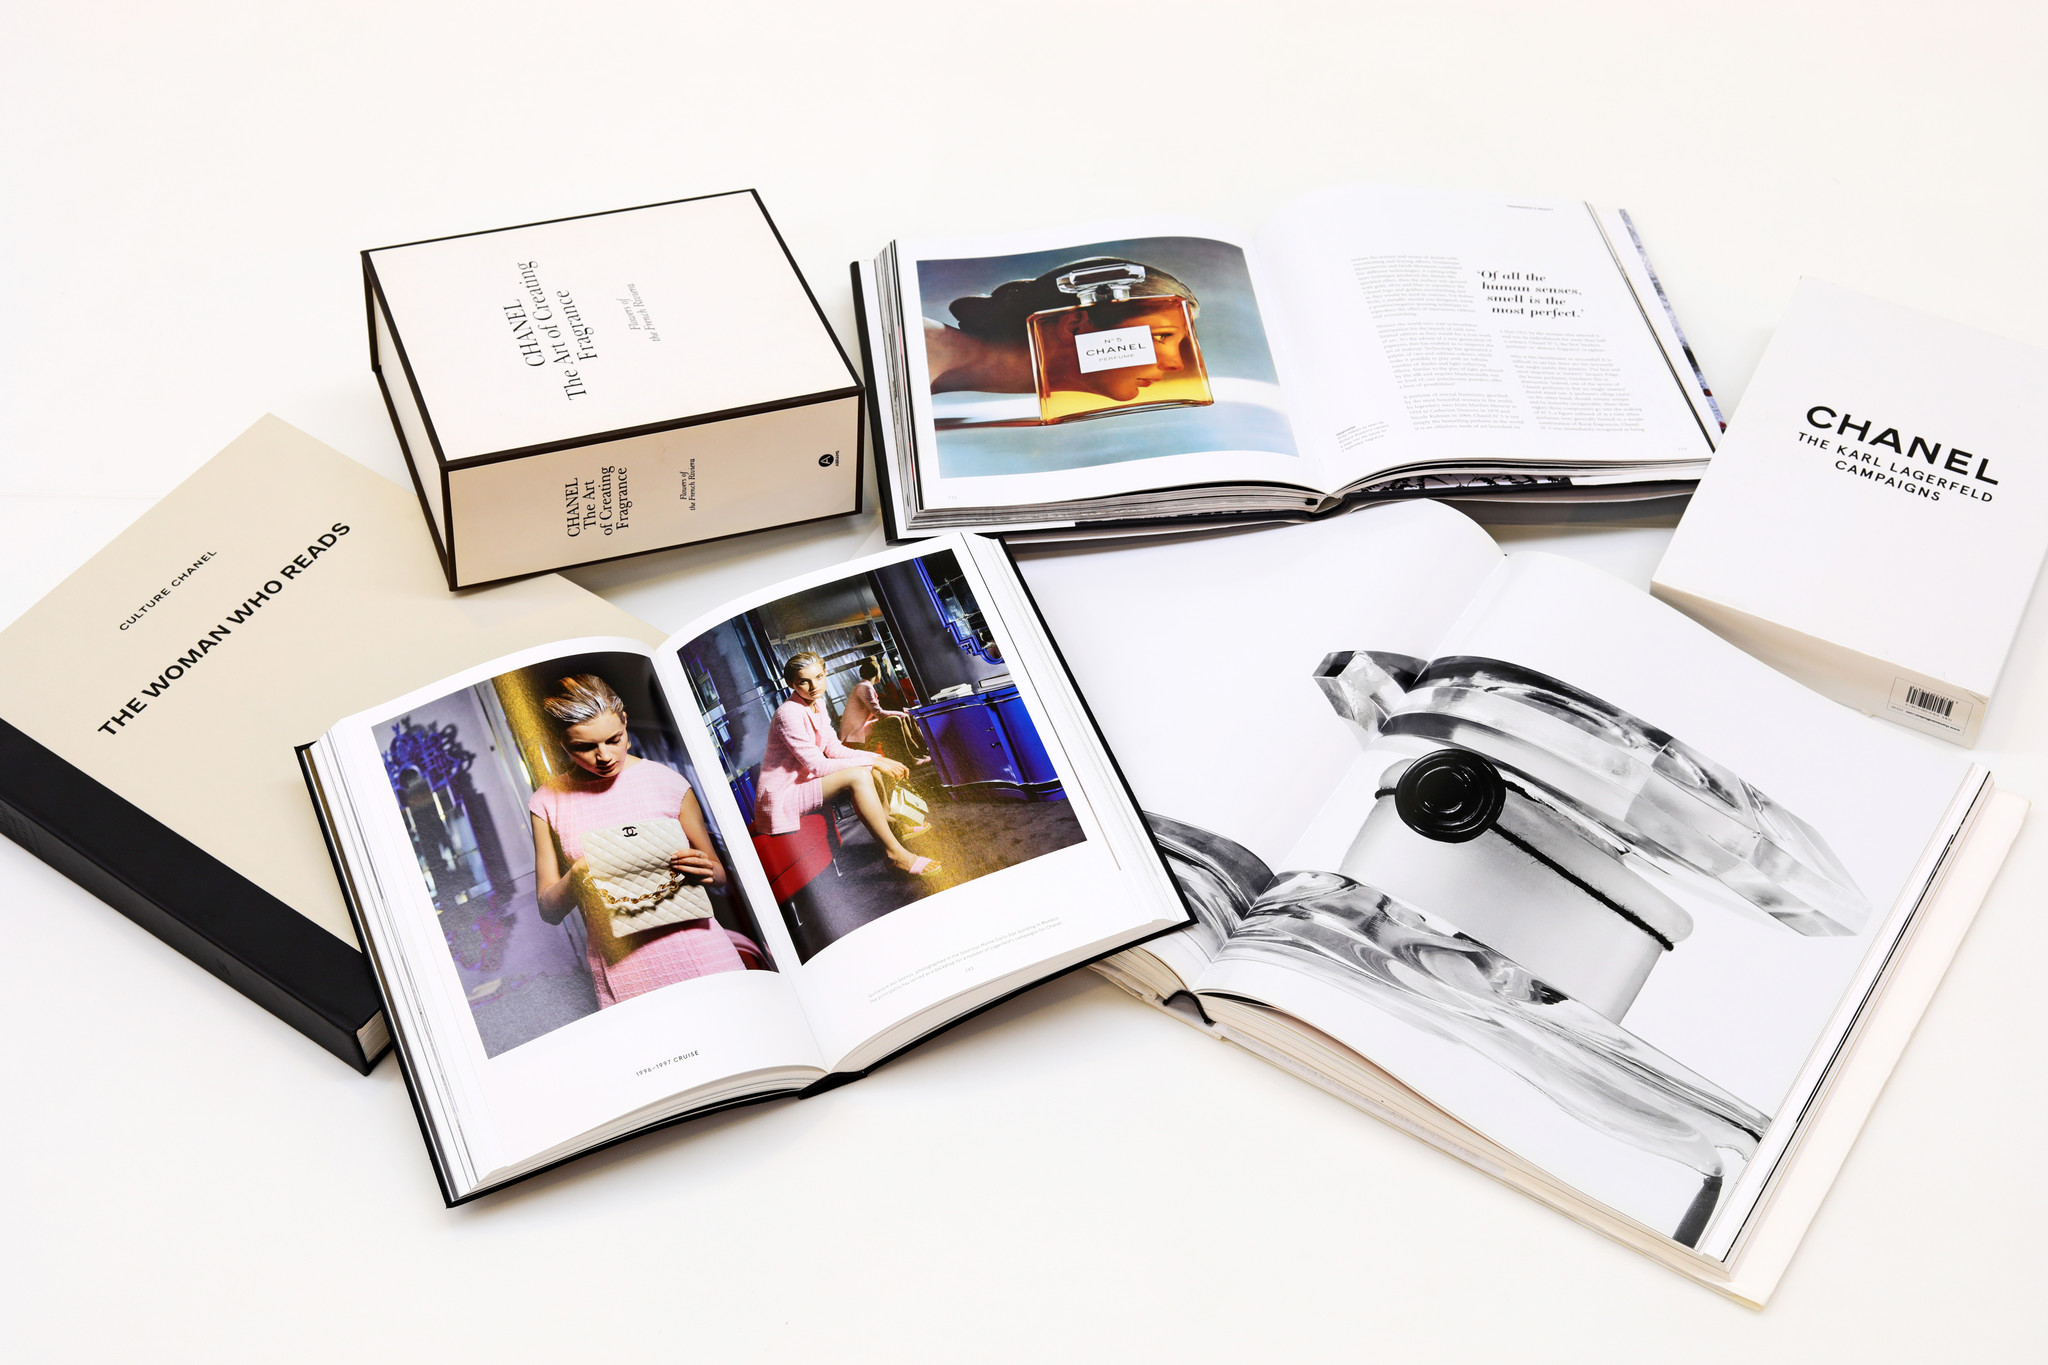 Original set of Chanel books - THE HOUSE OF WAUW